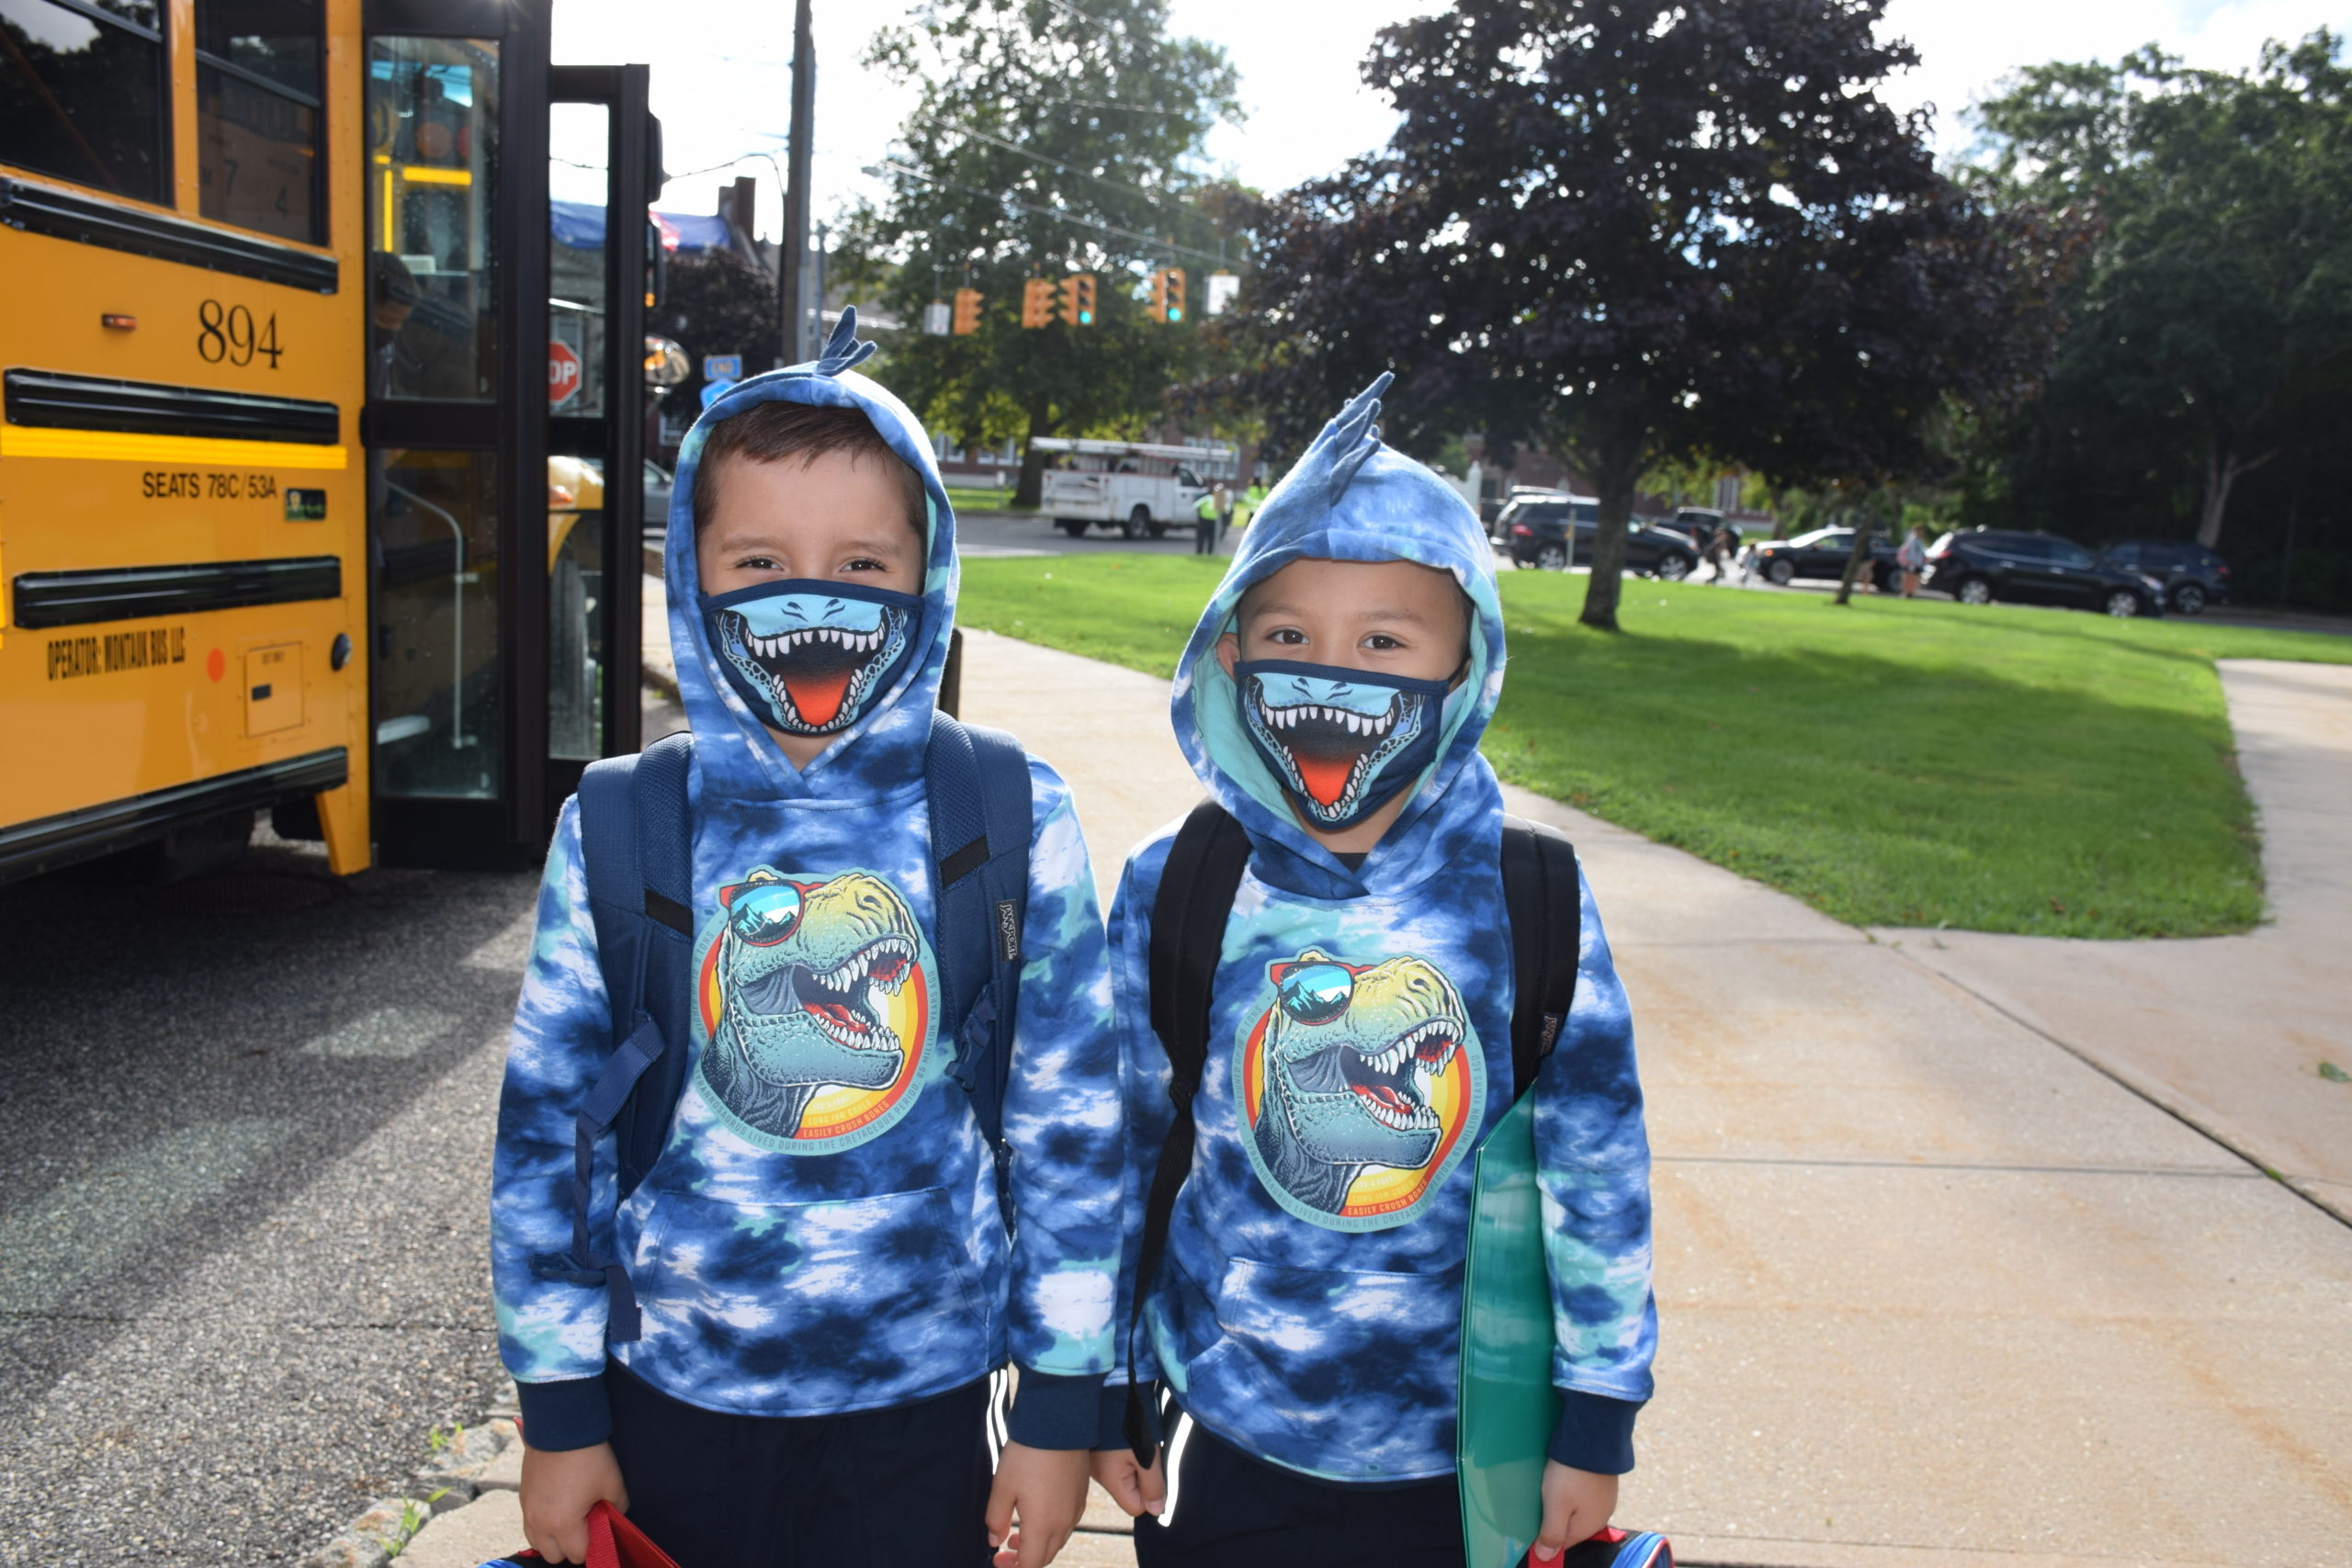 Westhampton Beach Elementary School students were all smiles as they arrived for their first day of school on September 2.